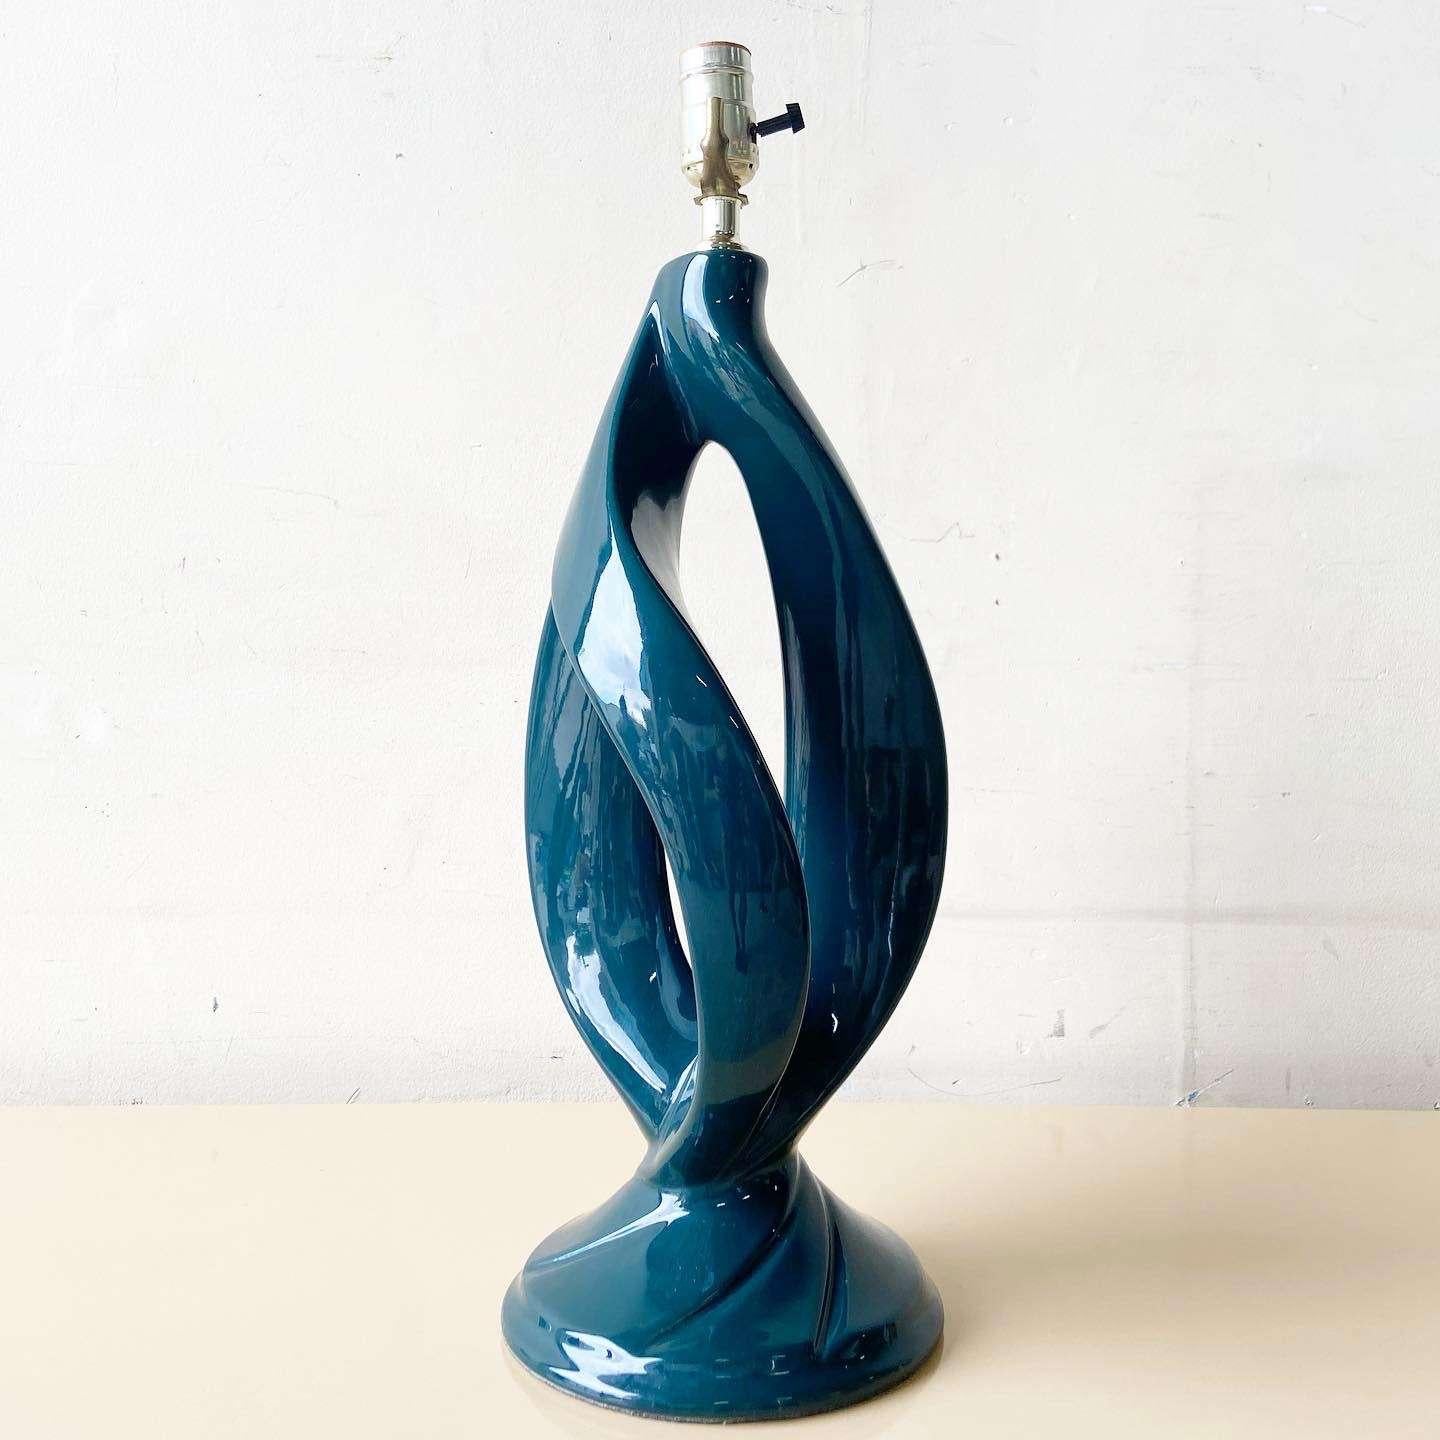 Exceptional postmodern sculpted ceramic table lamp. Resembles the burning bush.
